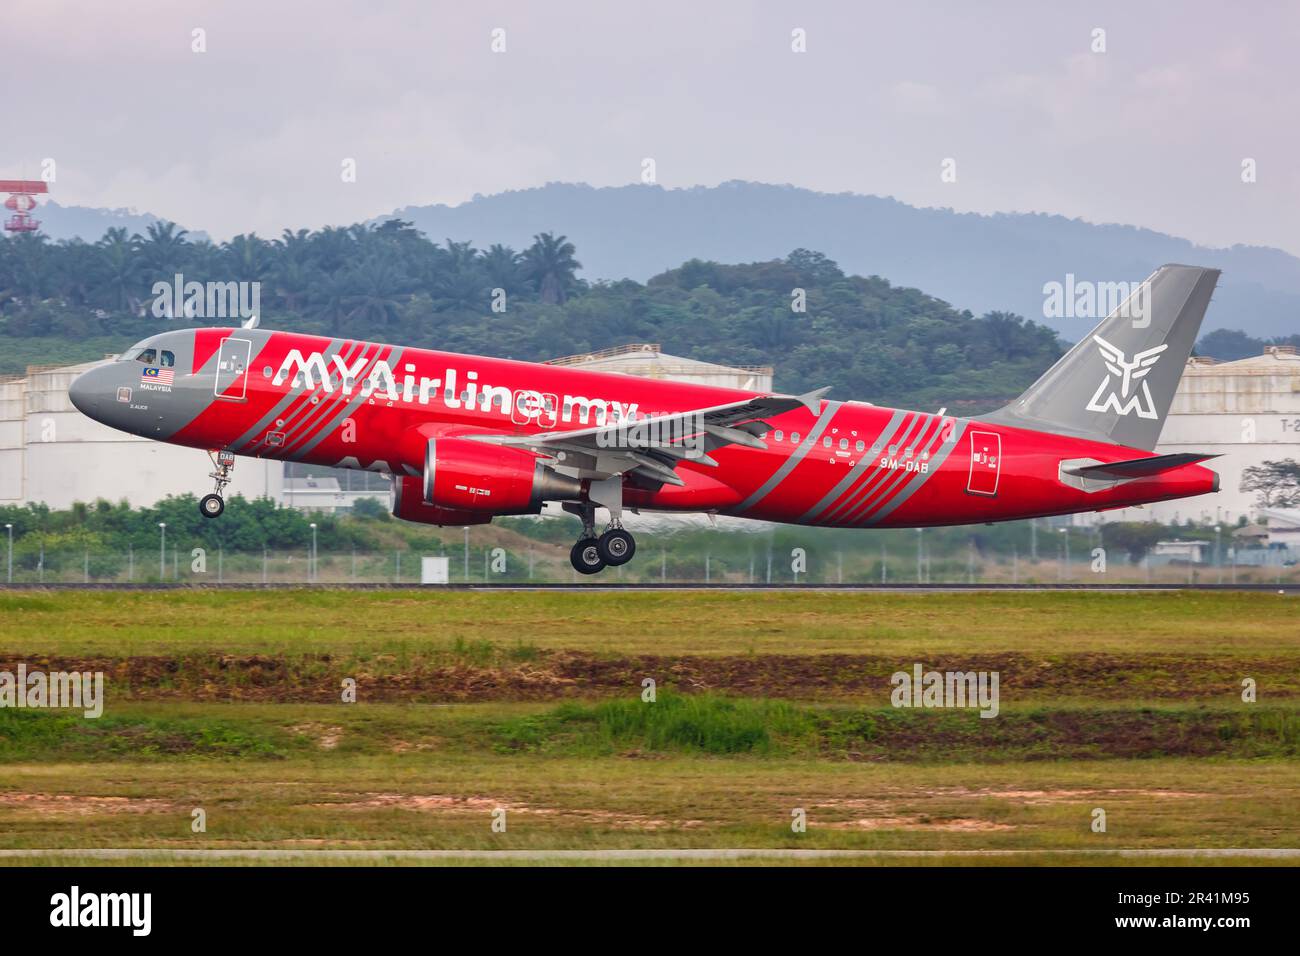 MYAirline Airbus A320 aircraft Kuala Lumpur airport in Malaysia Stock Photo